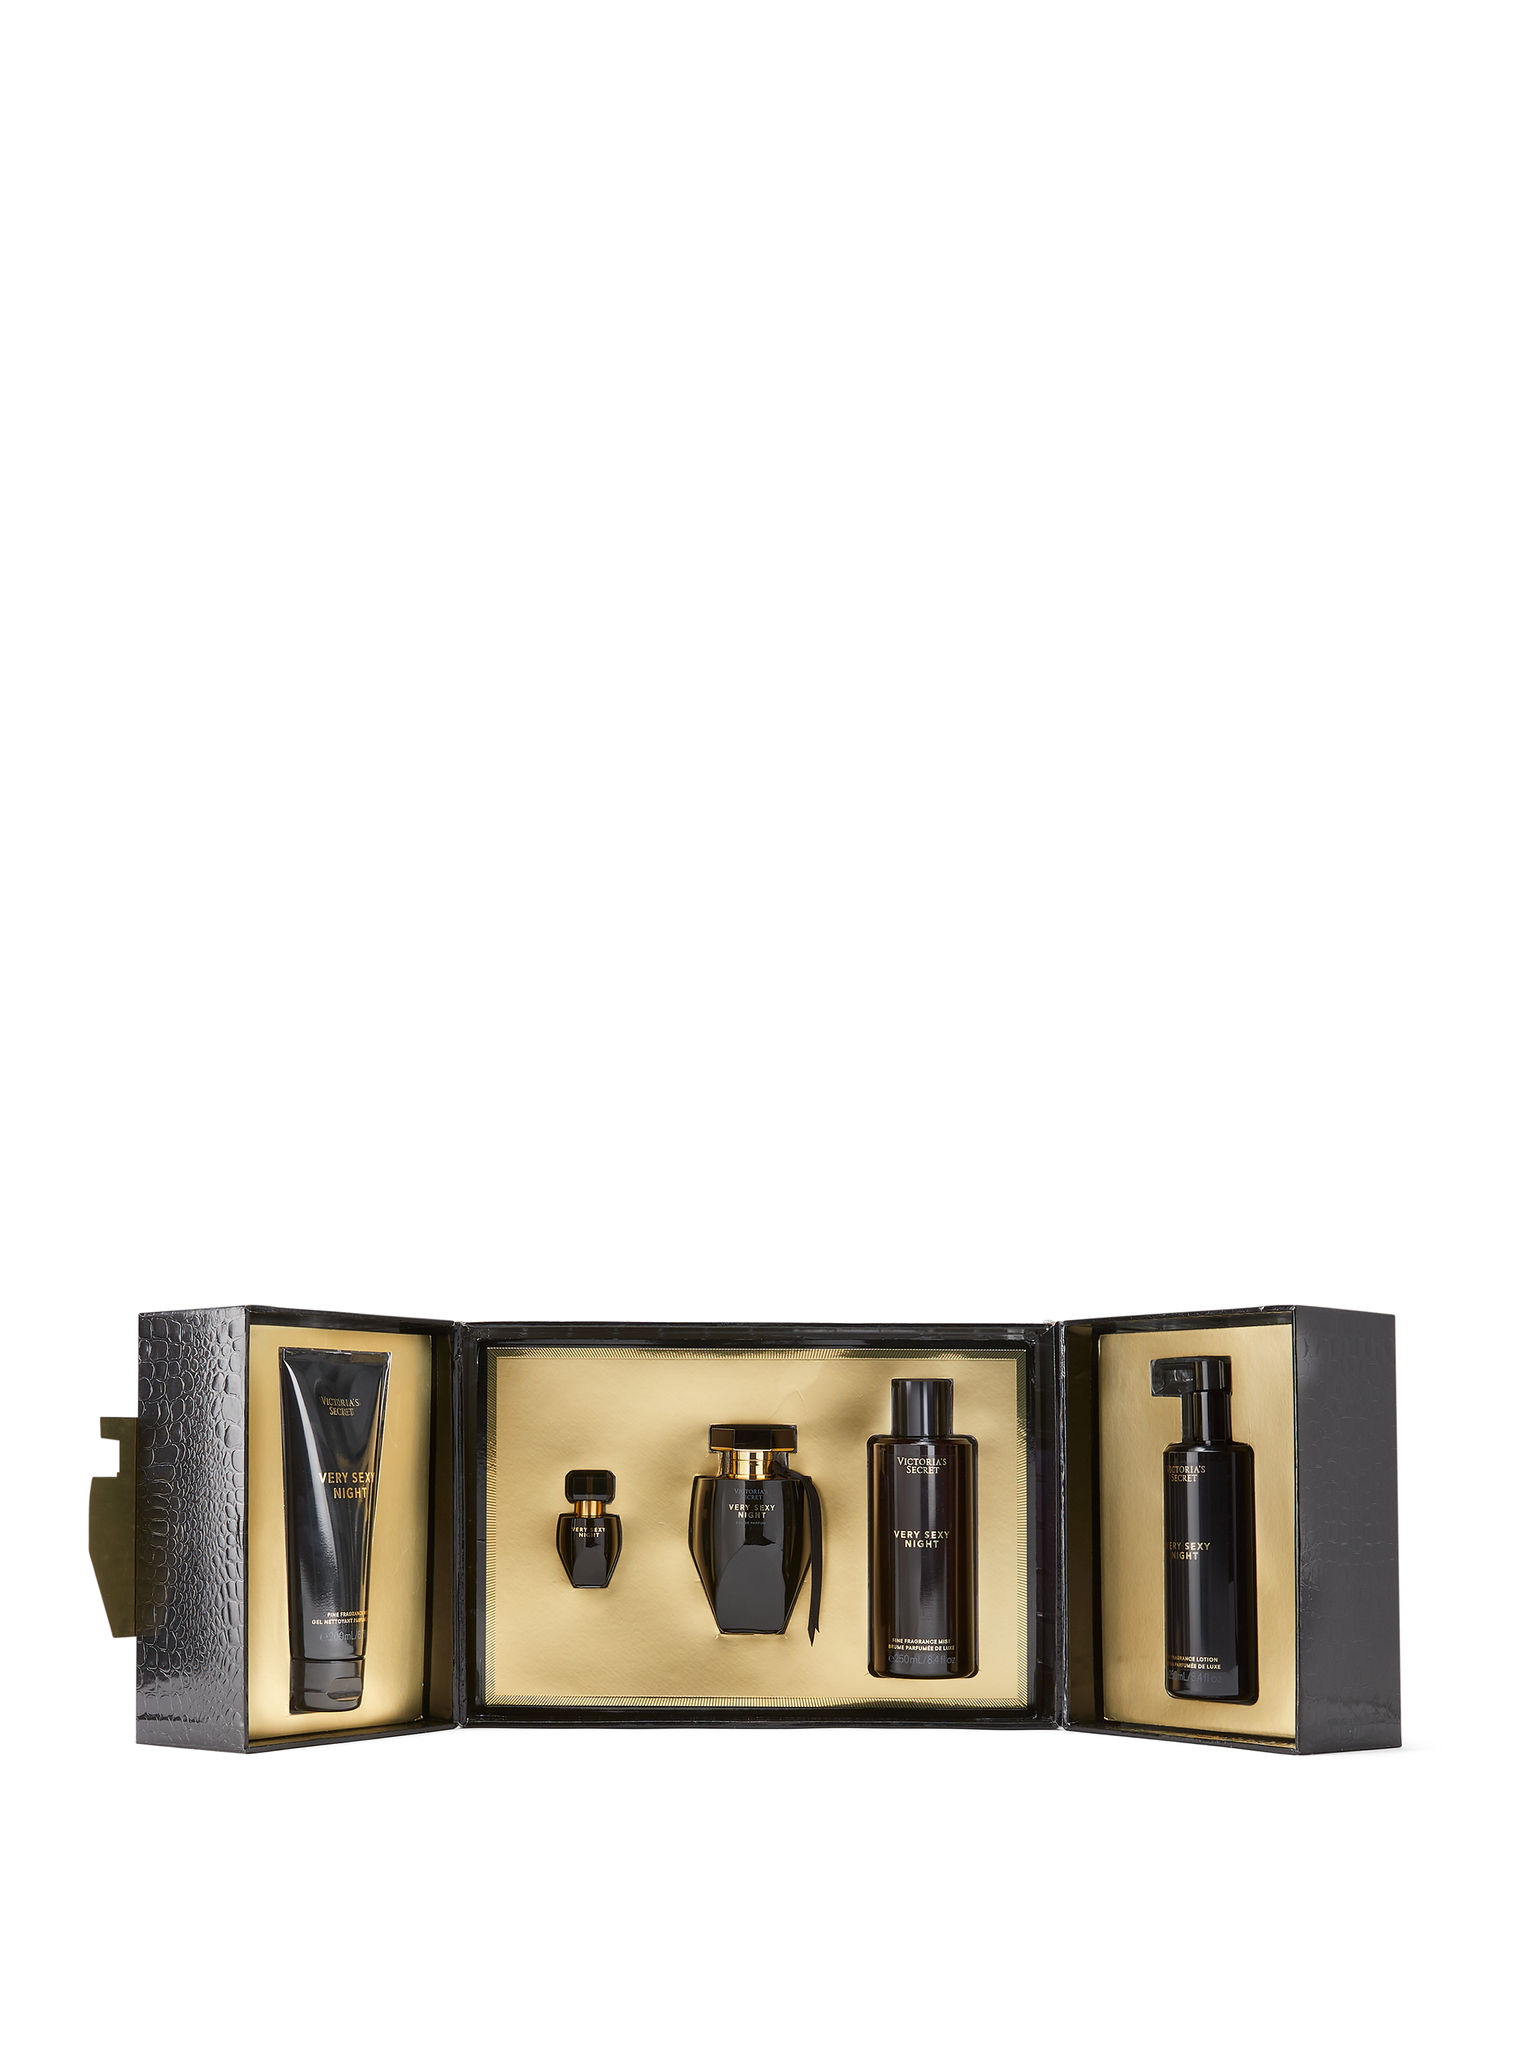 Very Sexy 5-Pieces Night Giftset image number null